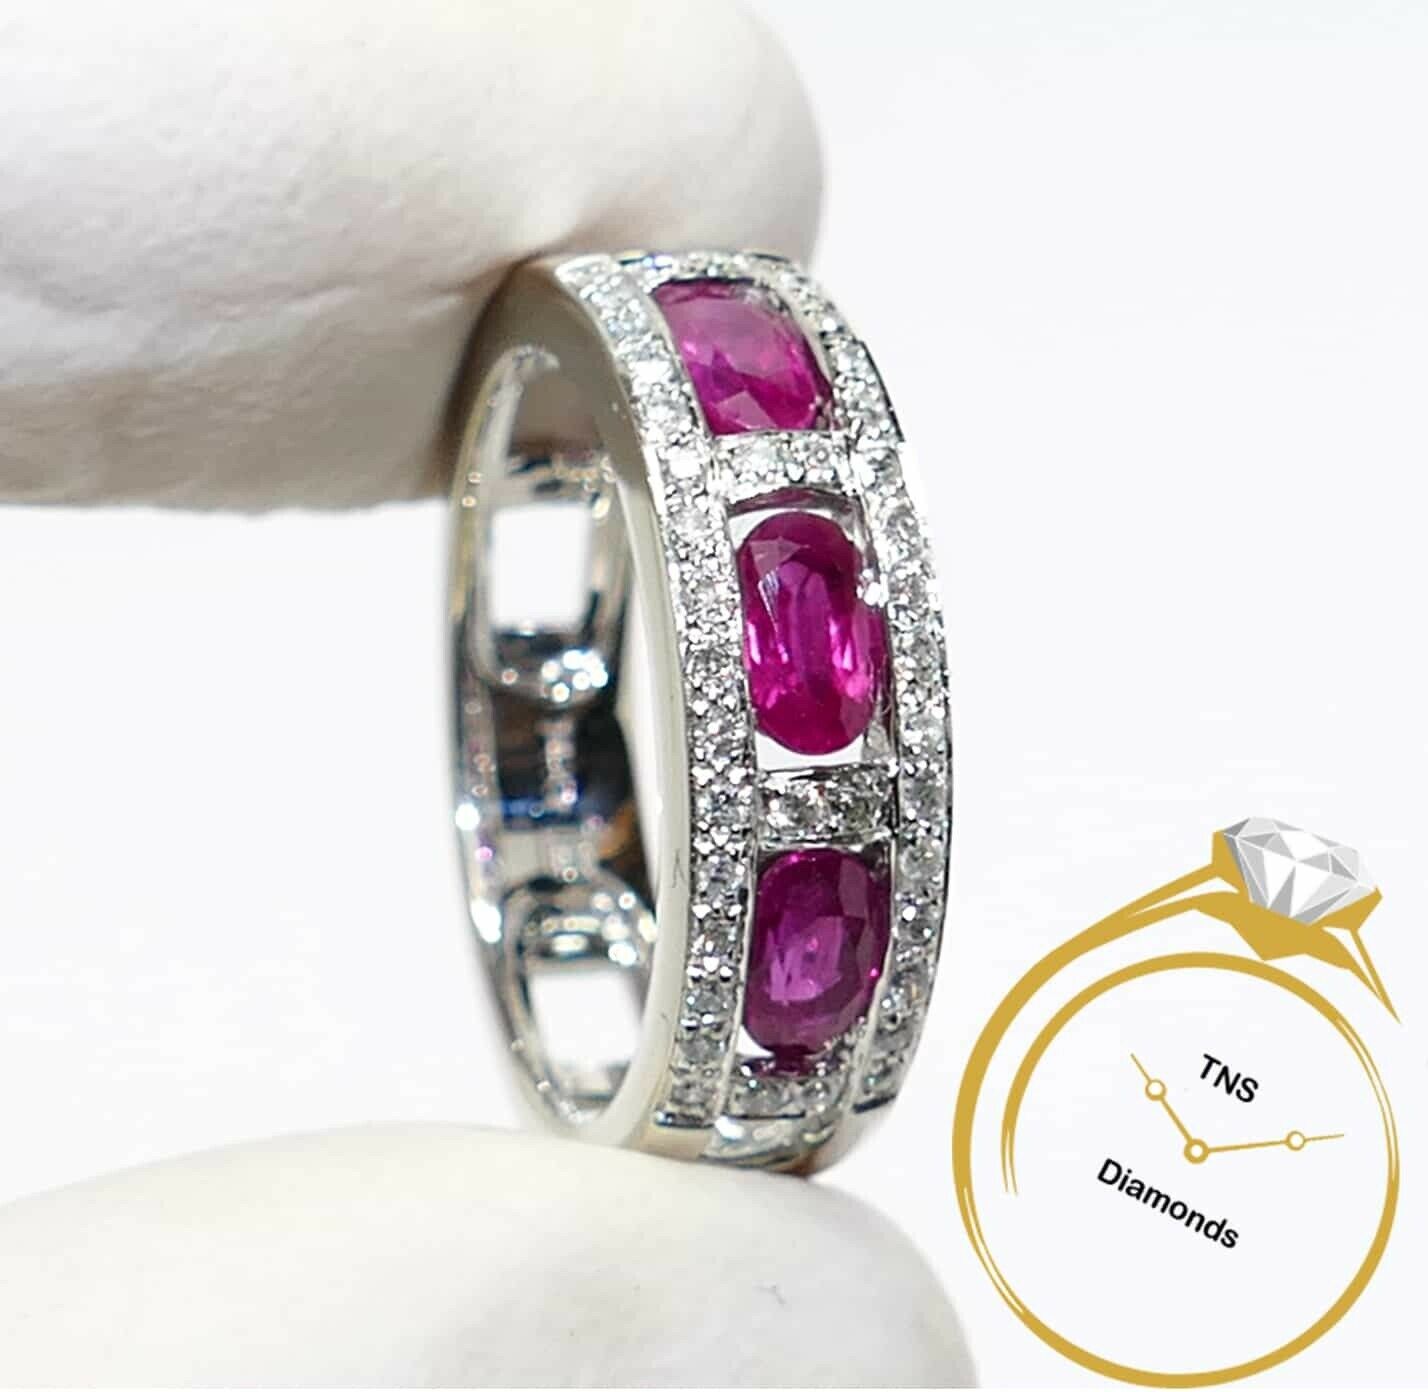 Natural-Oval-Ruby-Diamond-Band-115ctw-Ring-in-14k-White-Gold-Size-65-113783728700